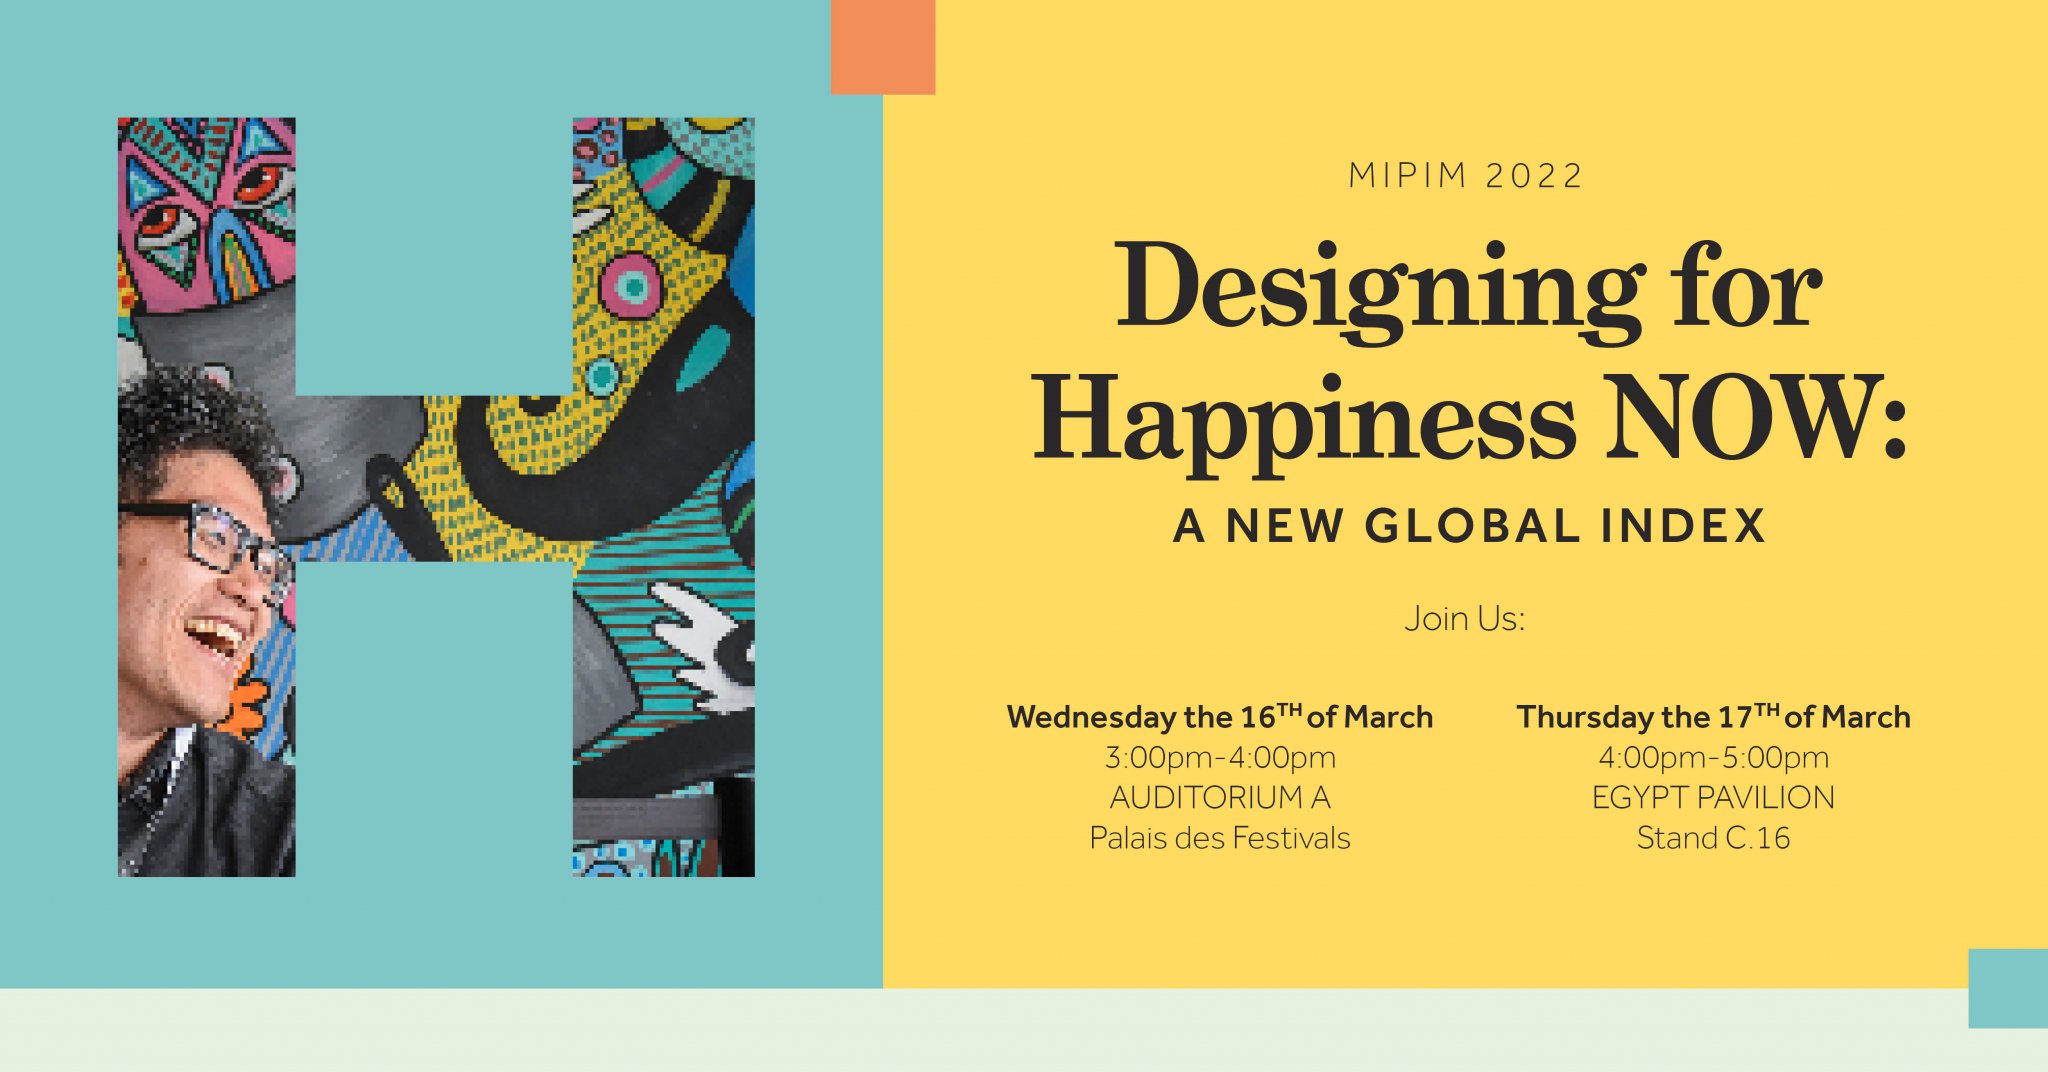 Happiness Index to be launched at MIPIM CallisonRTKL